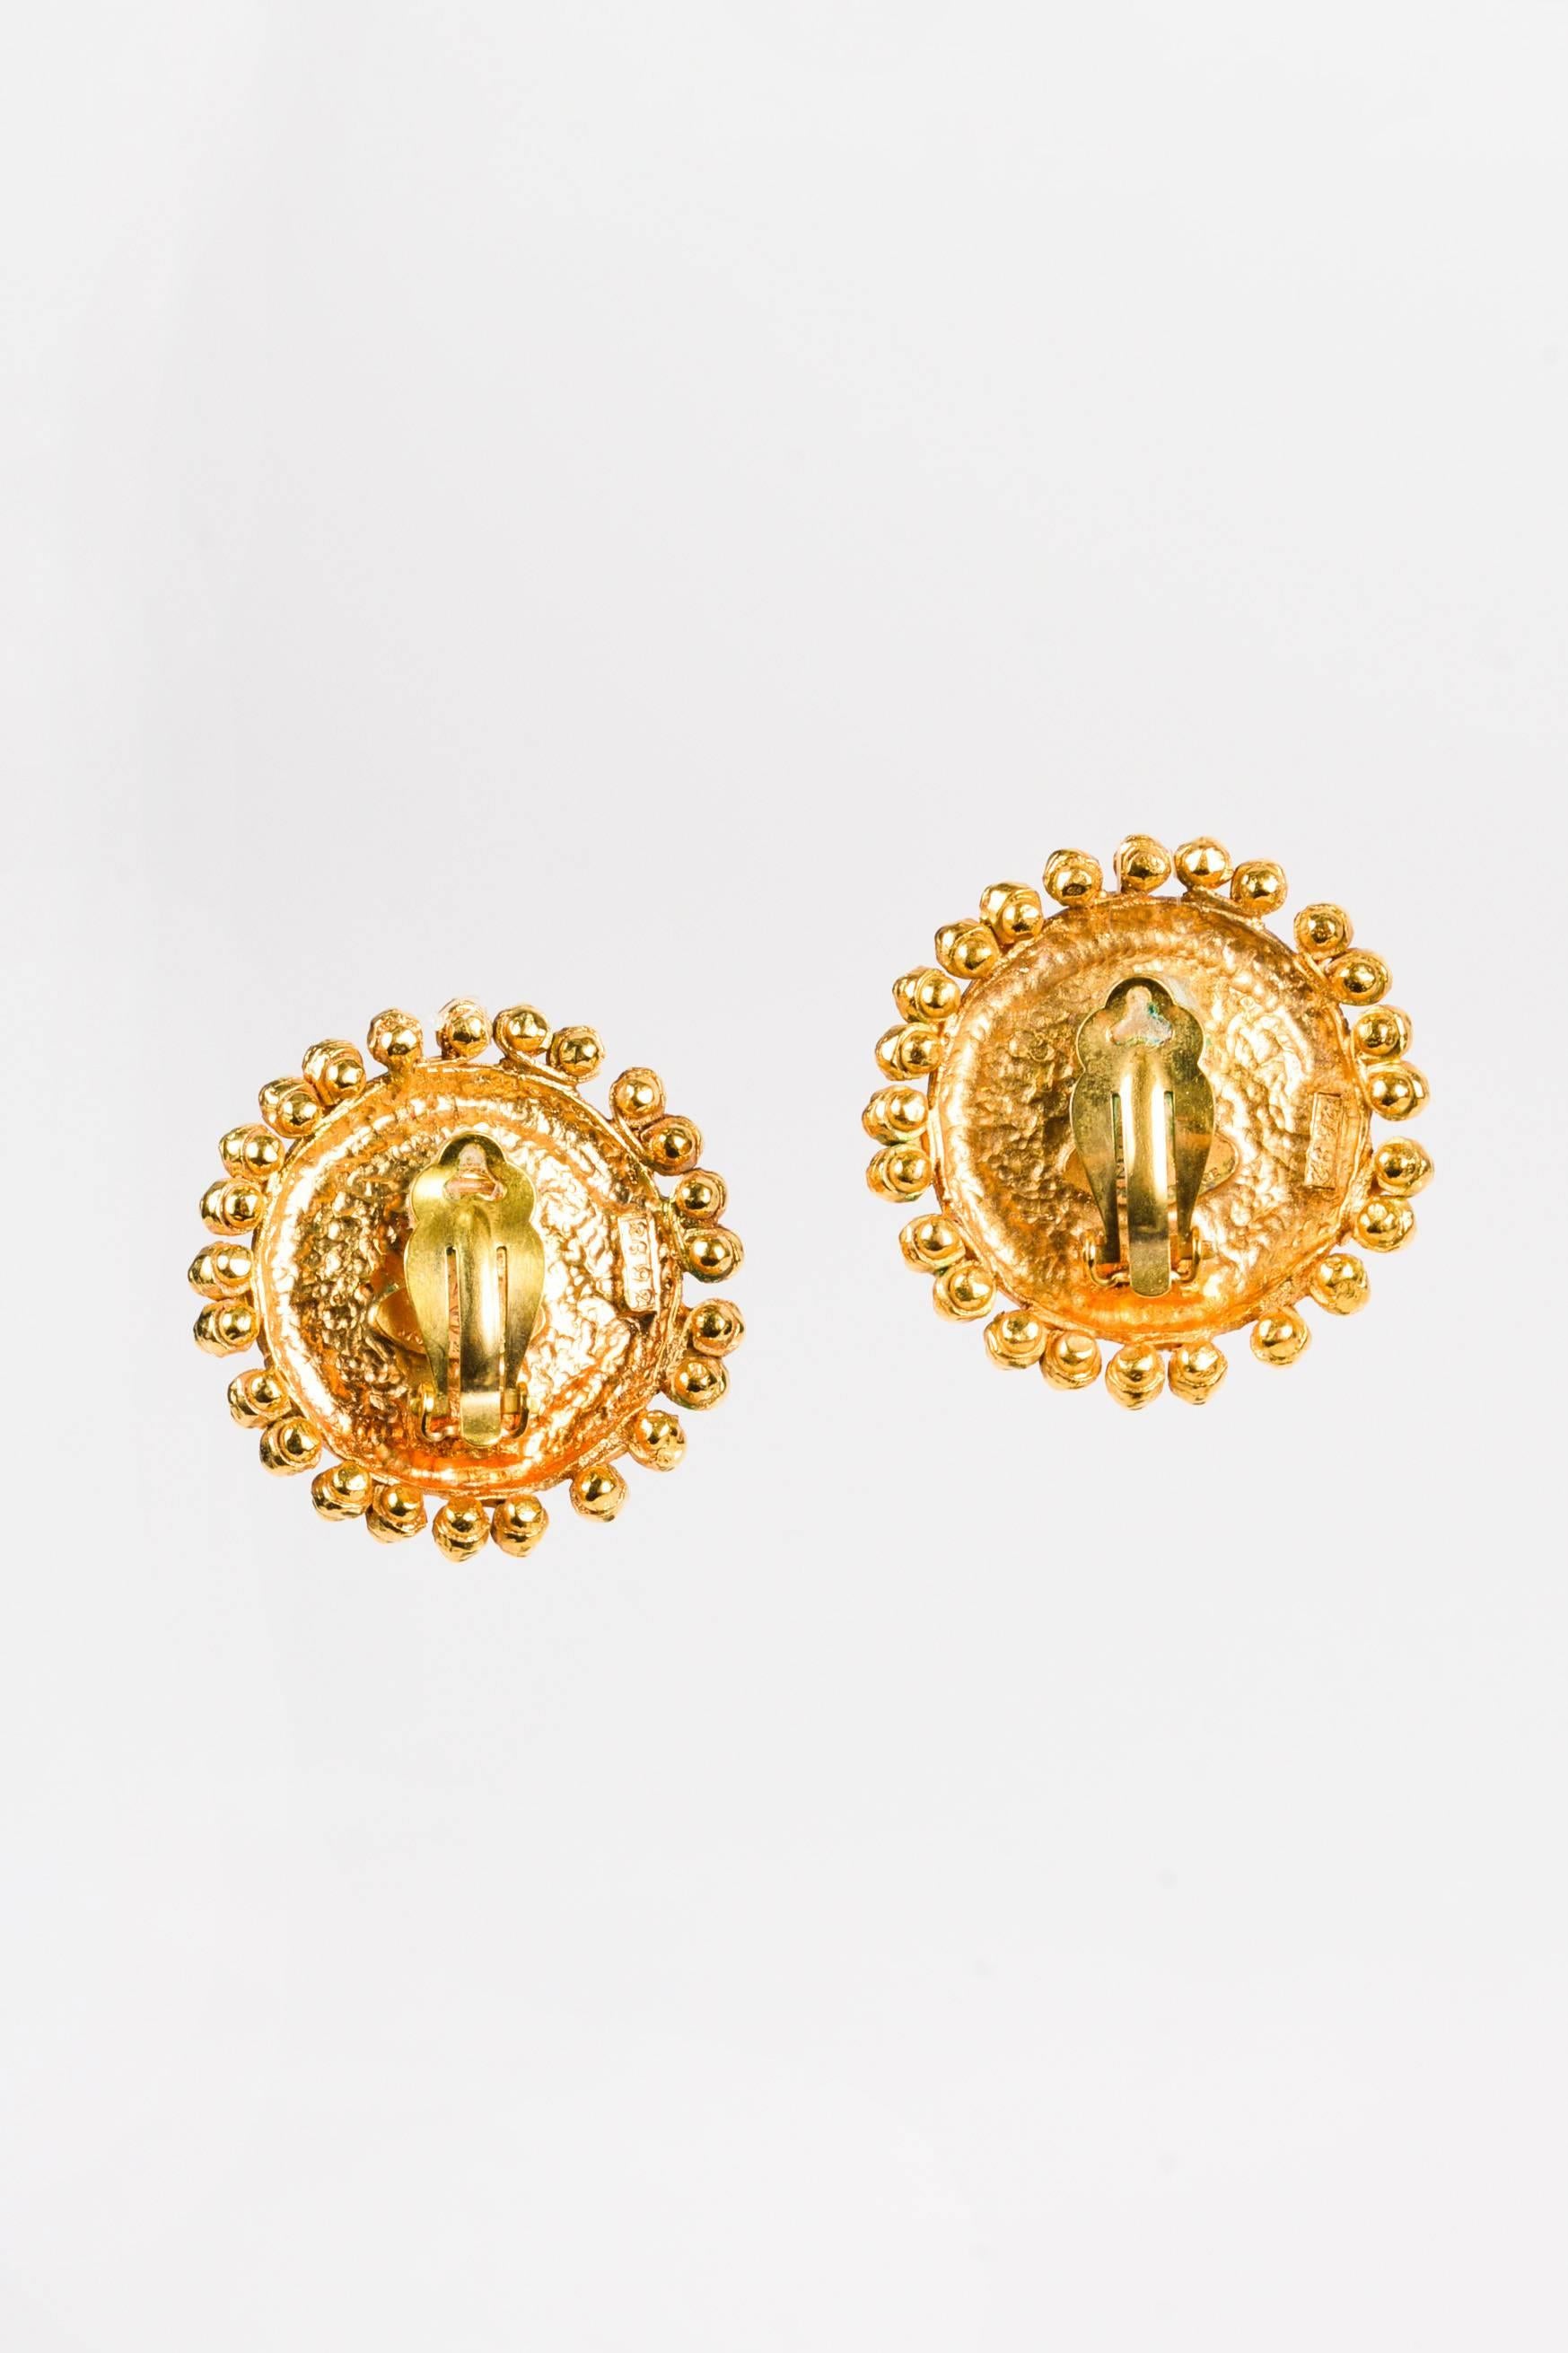 Vintage earring from Season 25 of 1988. Features a centered Gripoix stone surrounded by a textured gold-tone setting. Clip-on back.

Measurements: Total Height 1.5